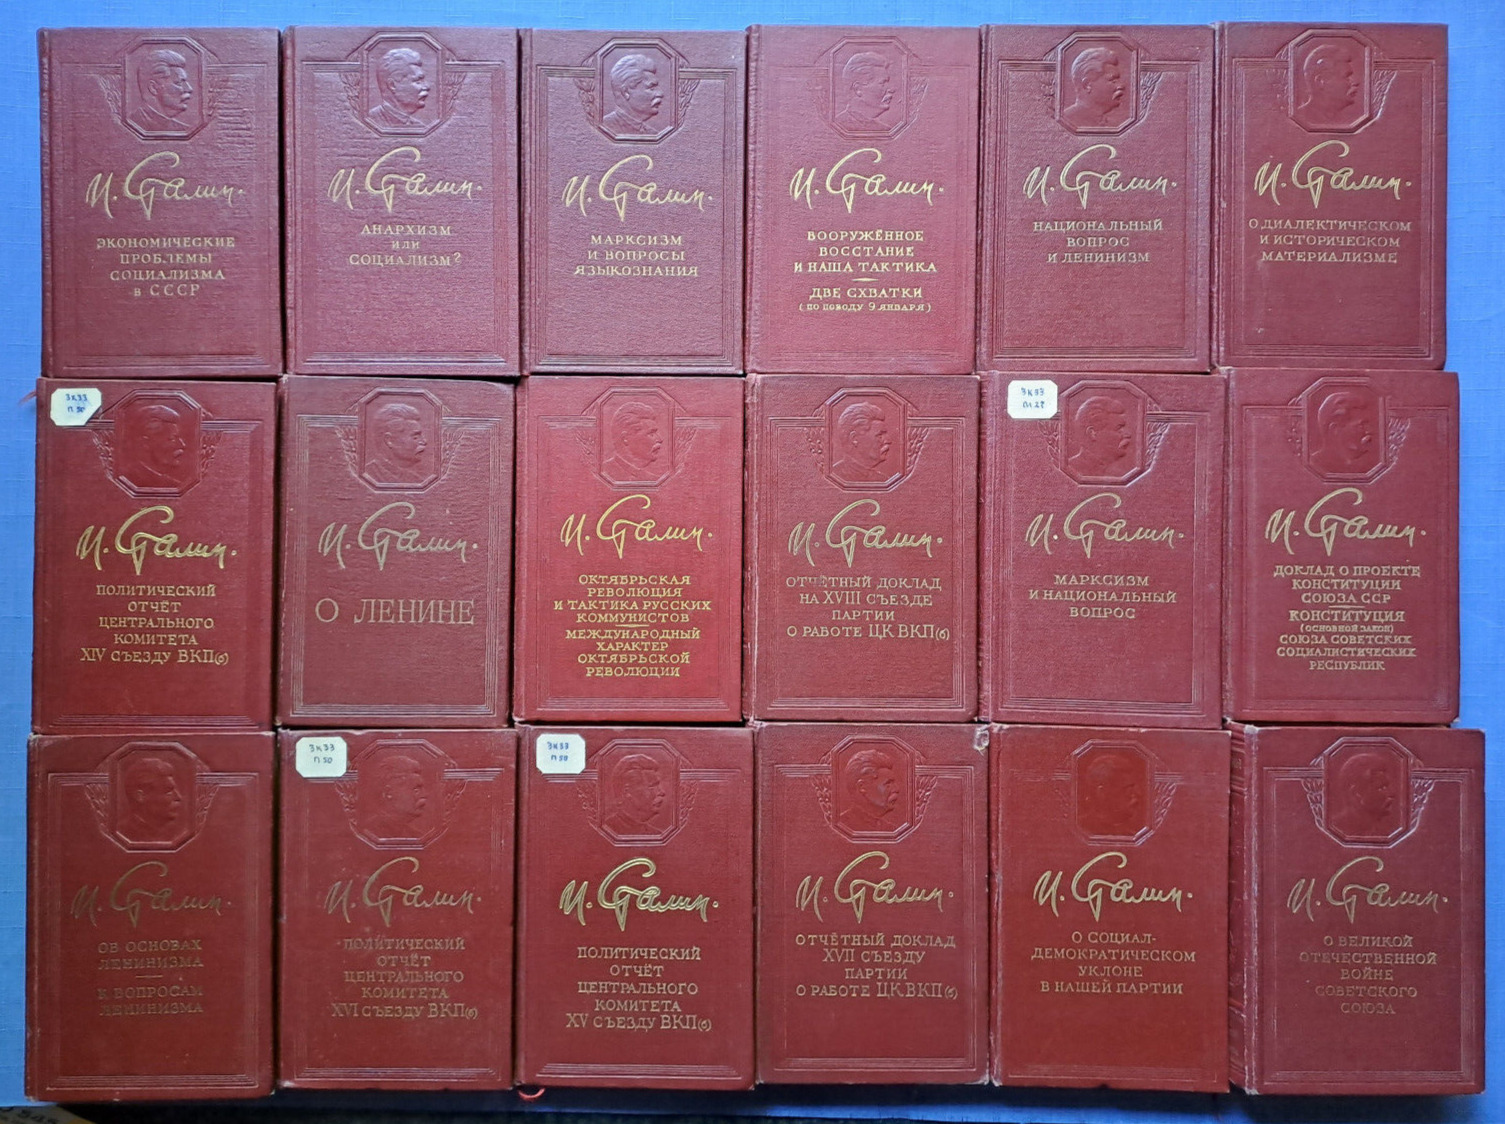 1950-1955 Сталин Stalin Collected works Very rare Set of 18 soviet Russian books